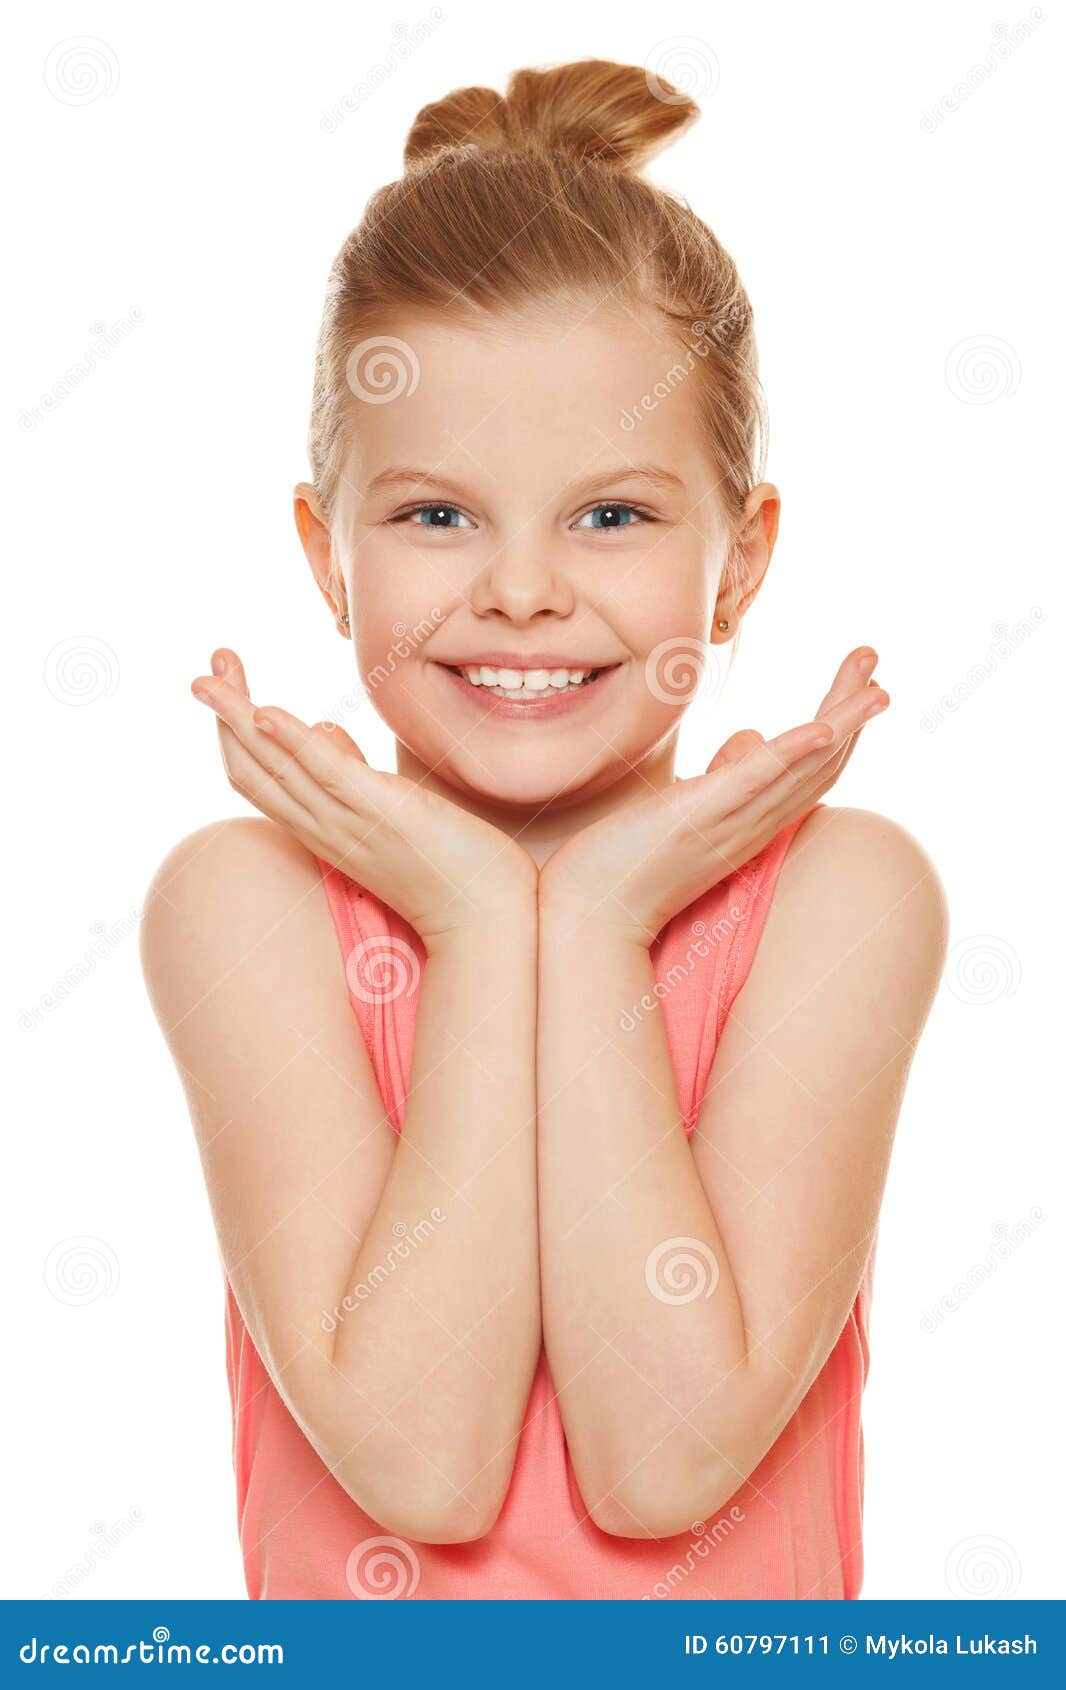 happy joyful little girl smiling with hands near face,  on white background